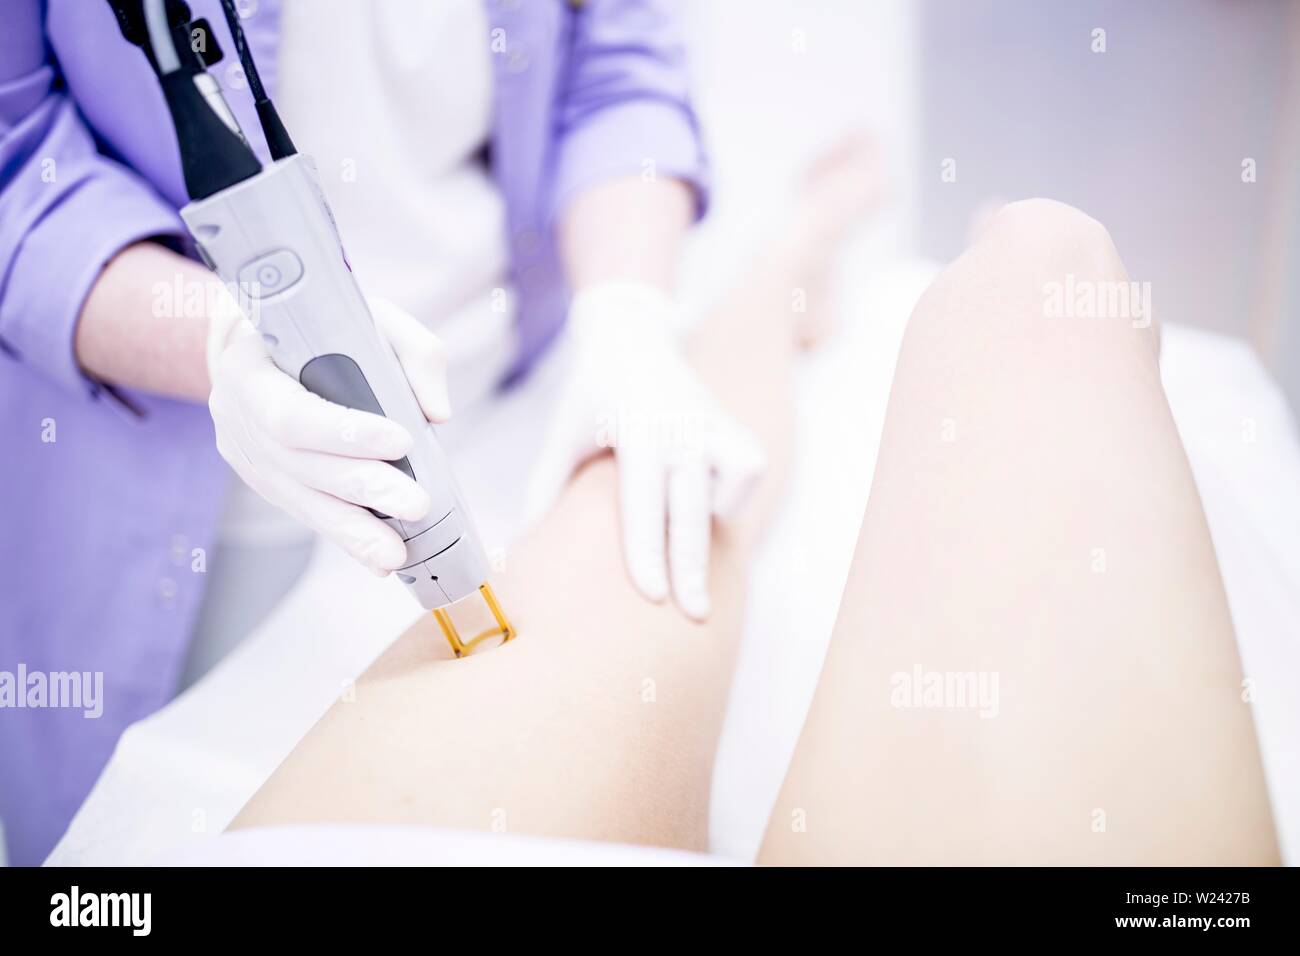 Young woman getting laser hair removal treatment on leg, close-up. Stock Photo